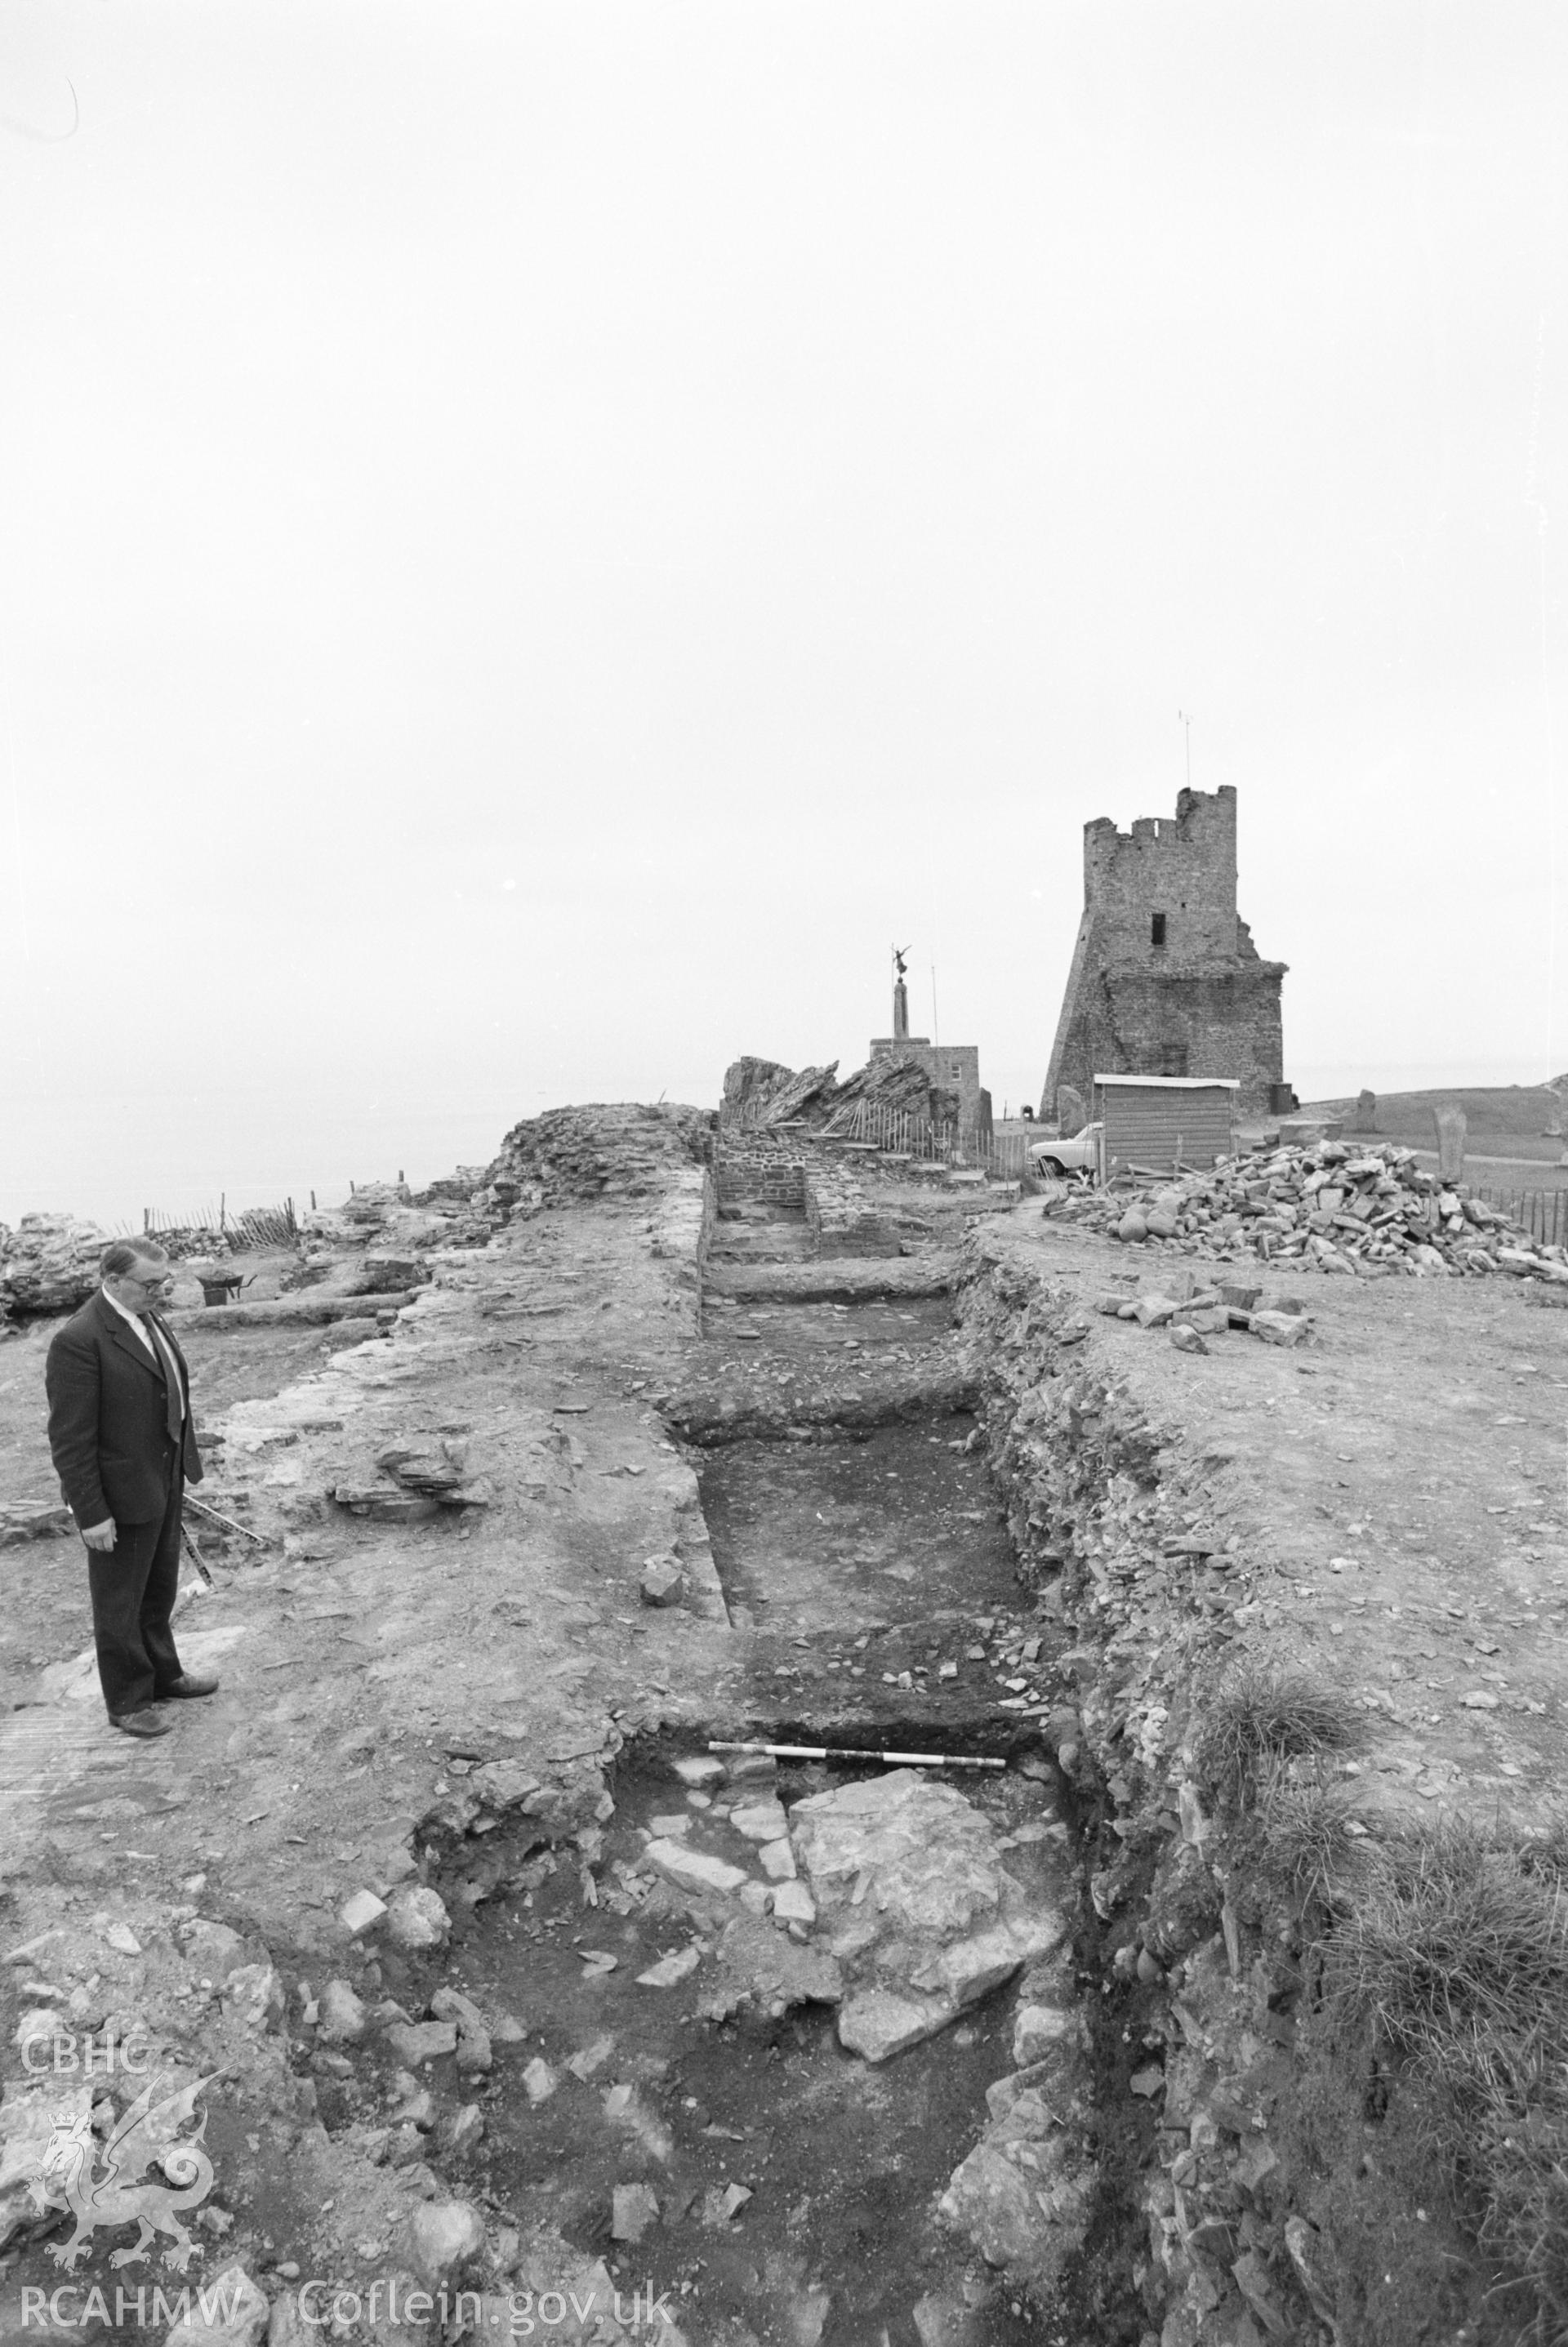 Excavation trenches at Aberystwyth Castle, c.1977.